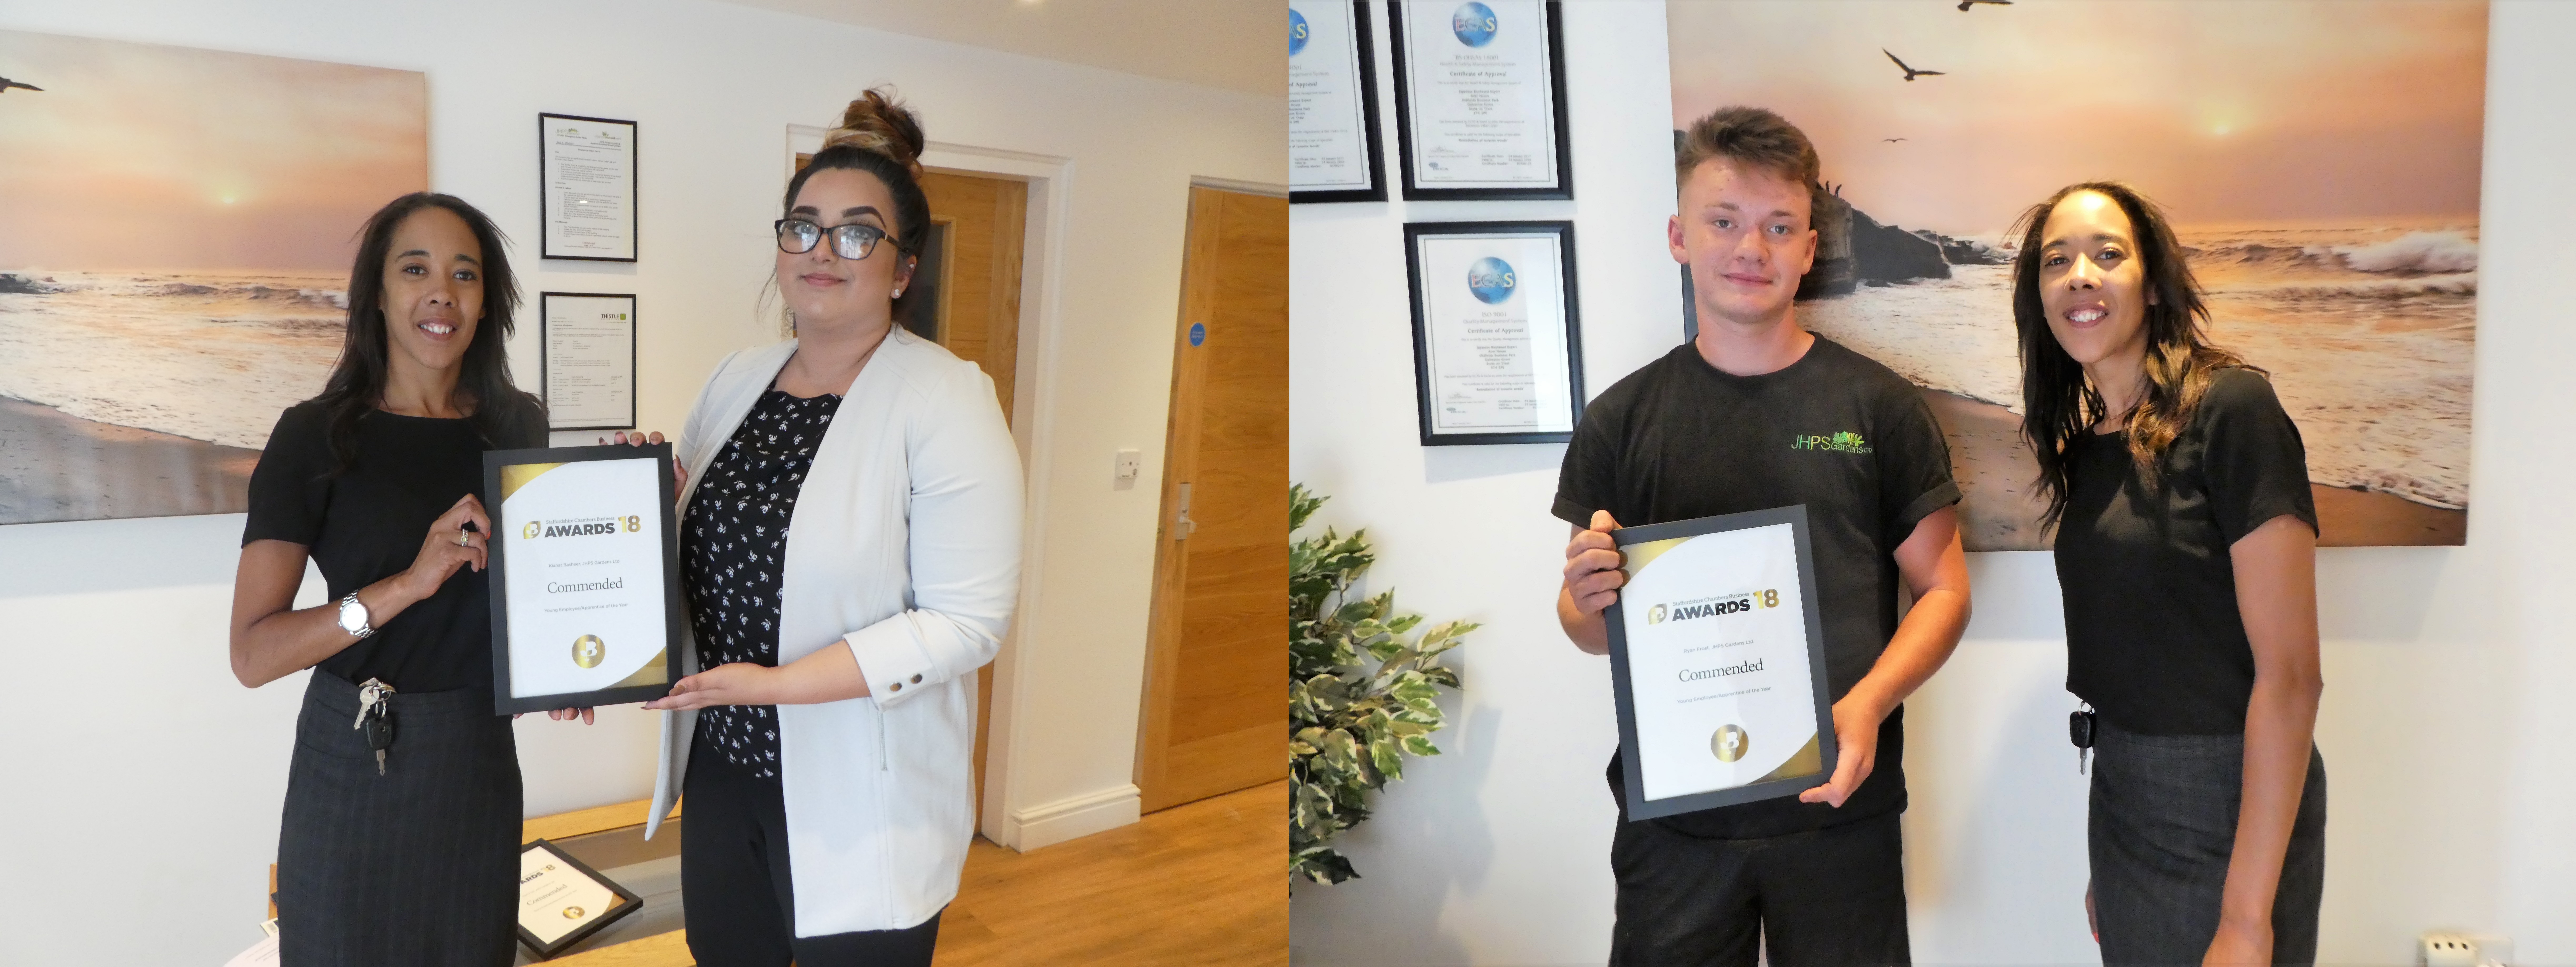 Ryan and Kianat - Young Employees Commended